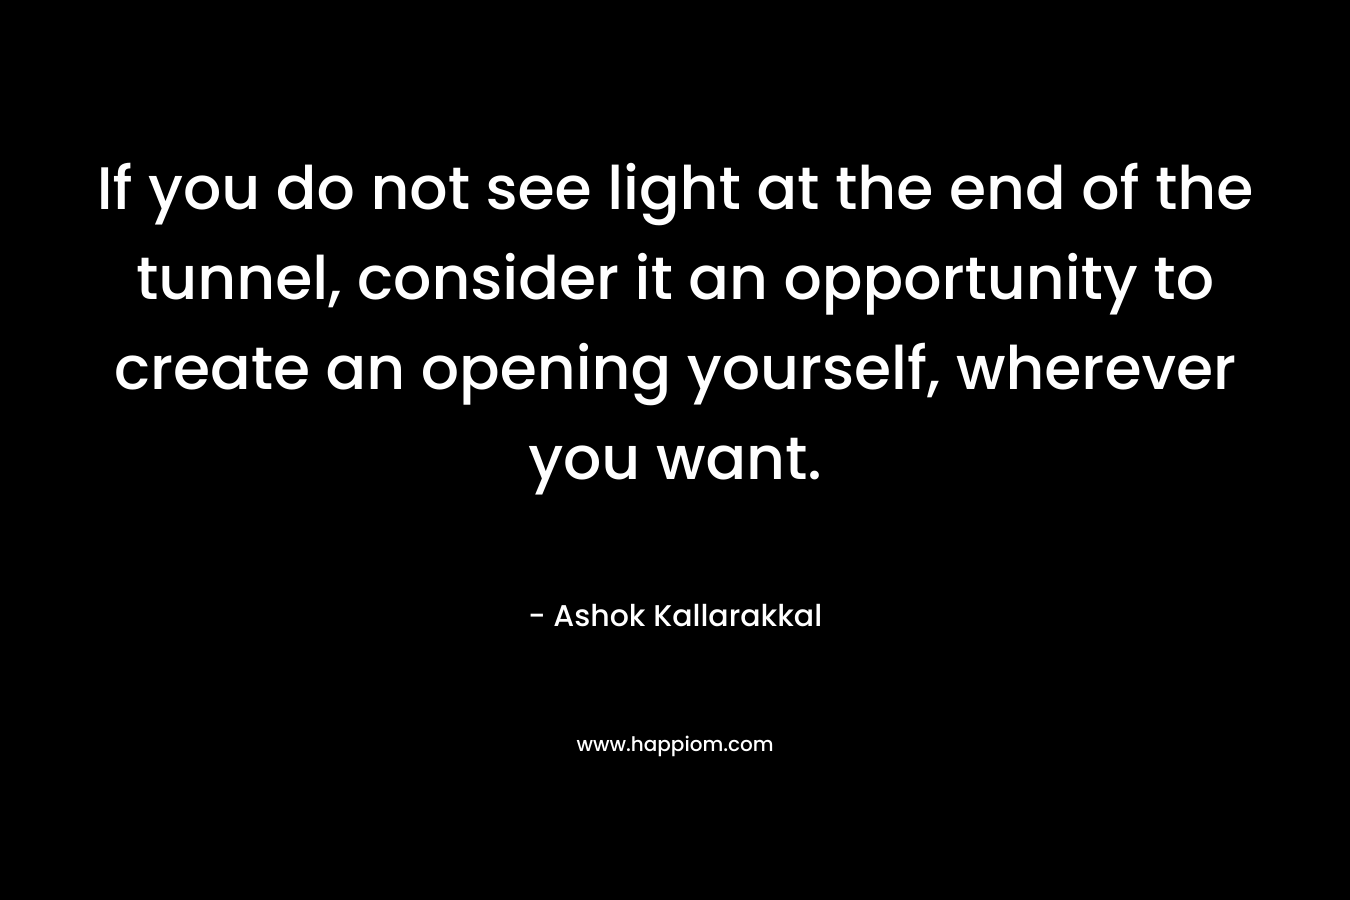 If you do not see light at the end of the tunnel, consider it an opportunity to create an opening yourself, wherever you want. – Ashok  Kallarakkal